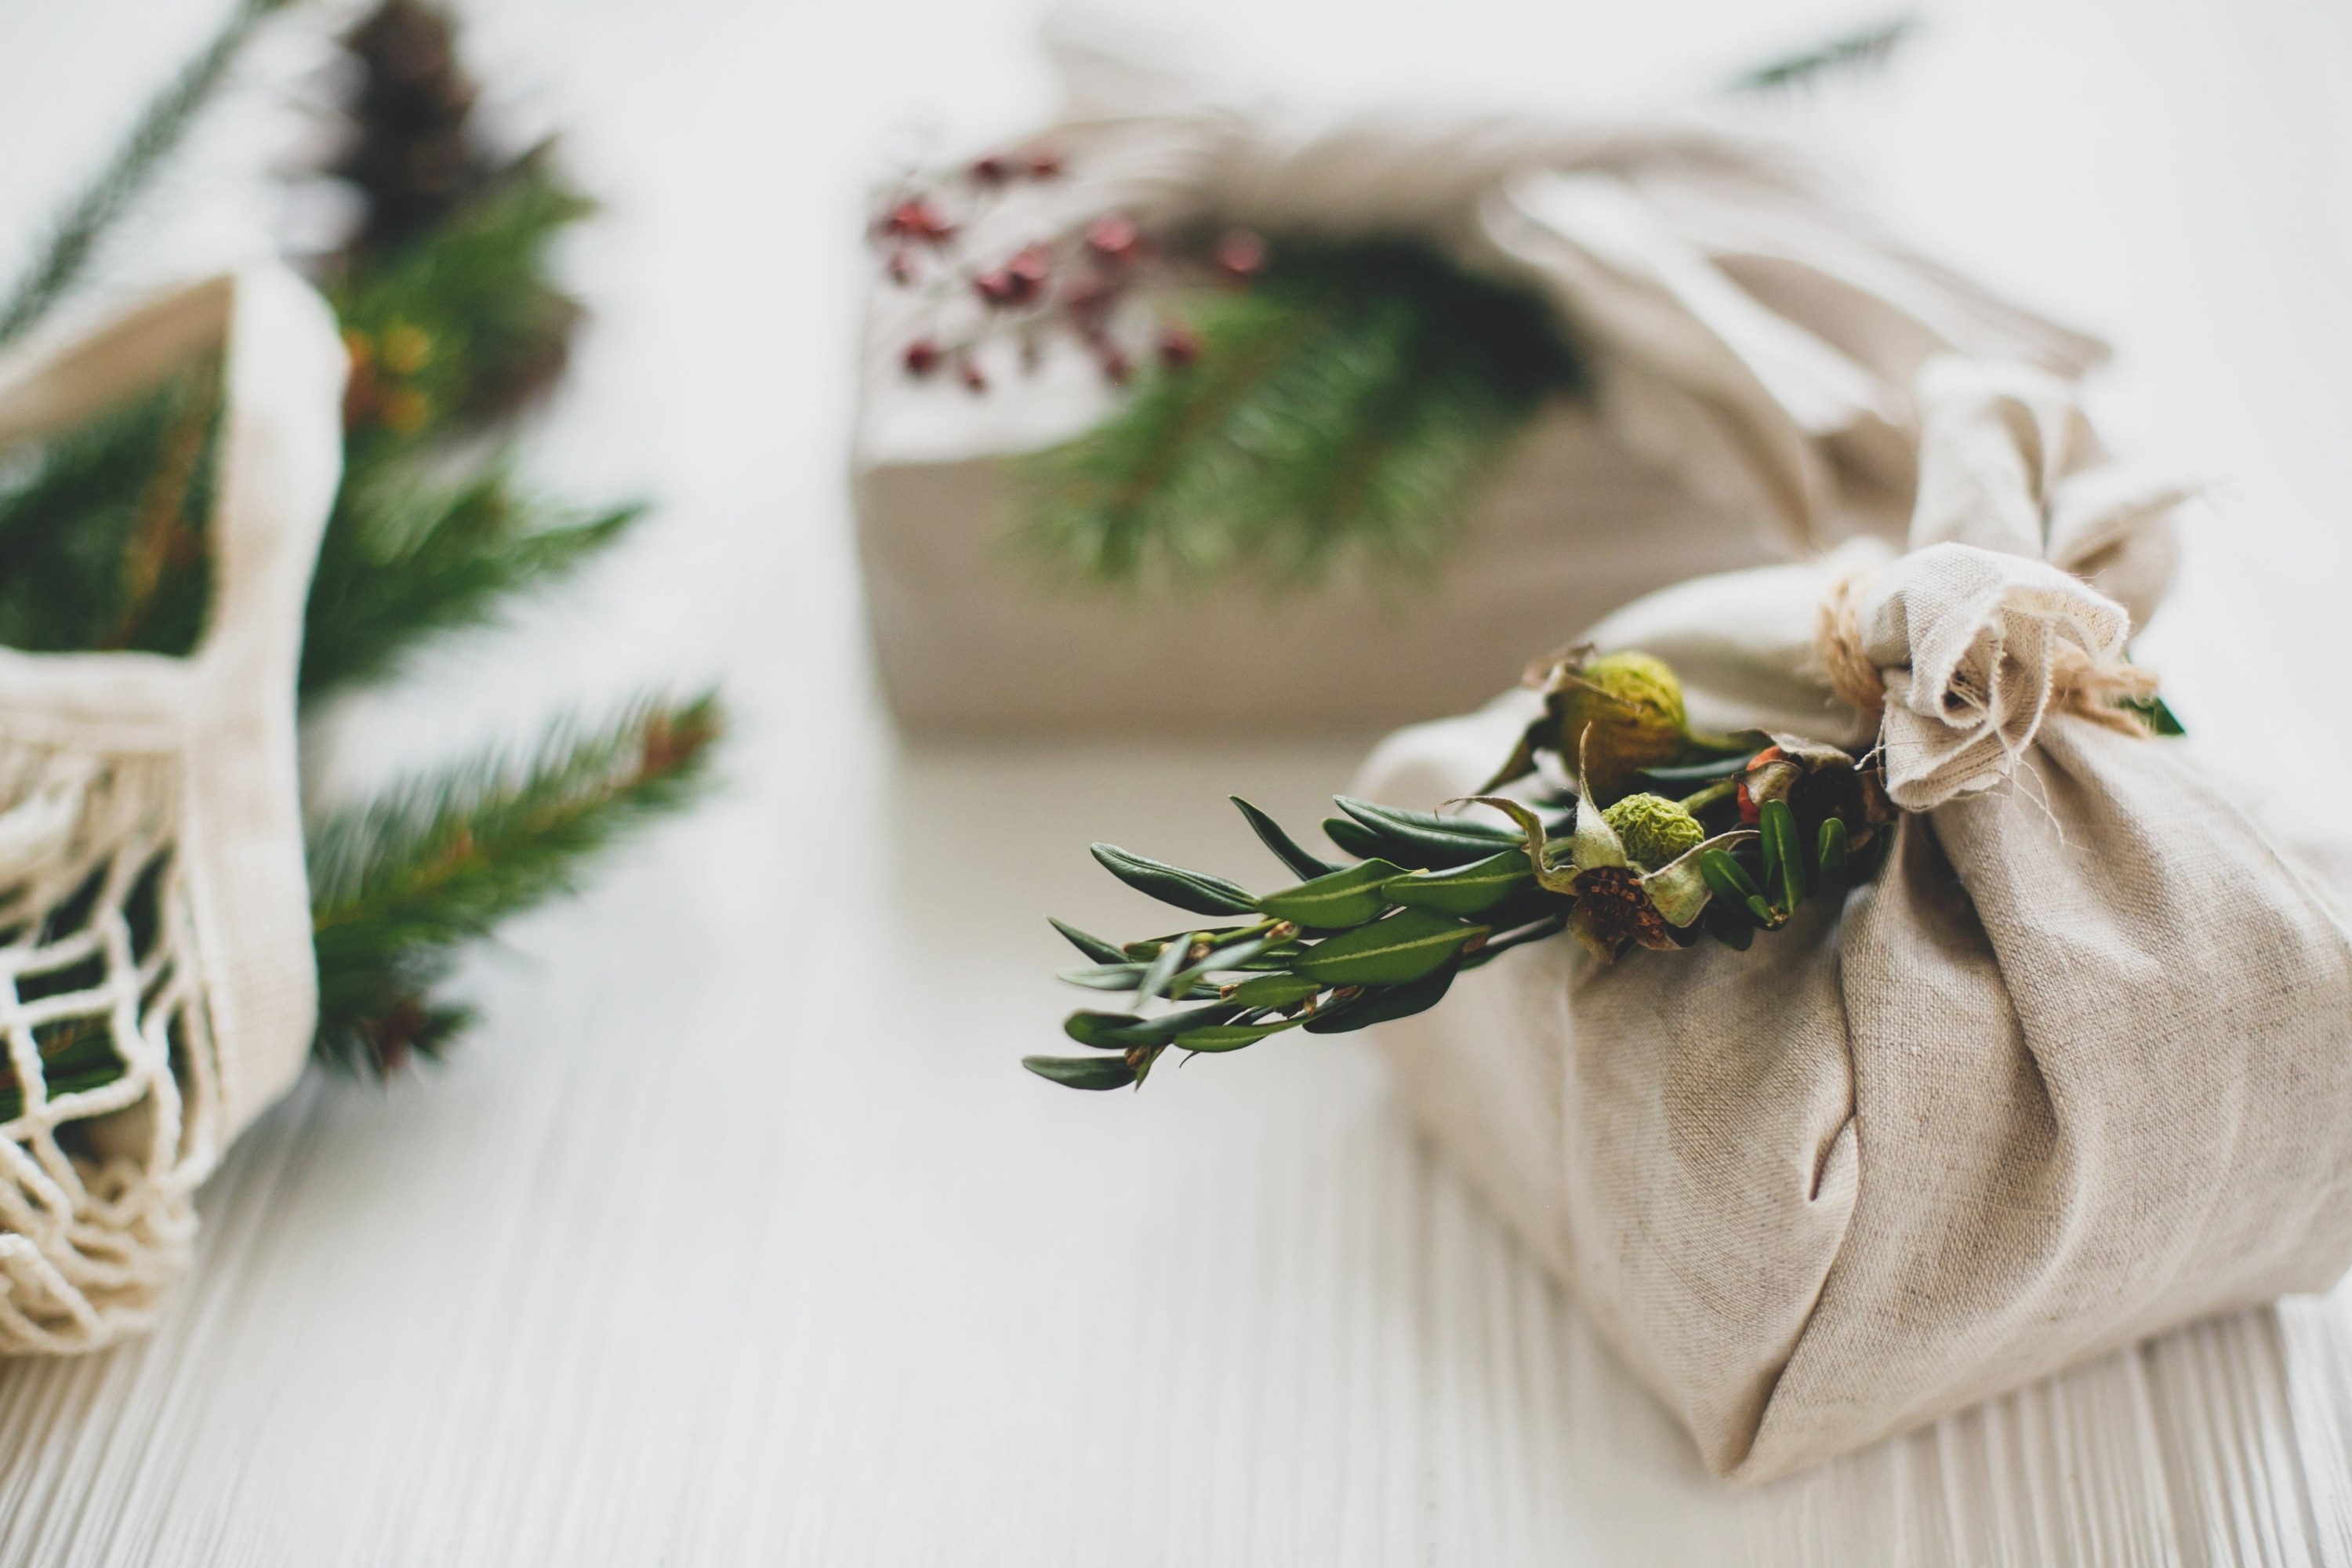 Multiple gifts wrapped in natural colored linen with fresh greenery. 